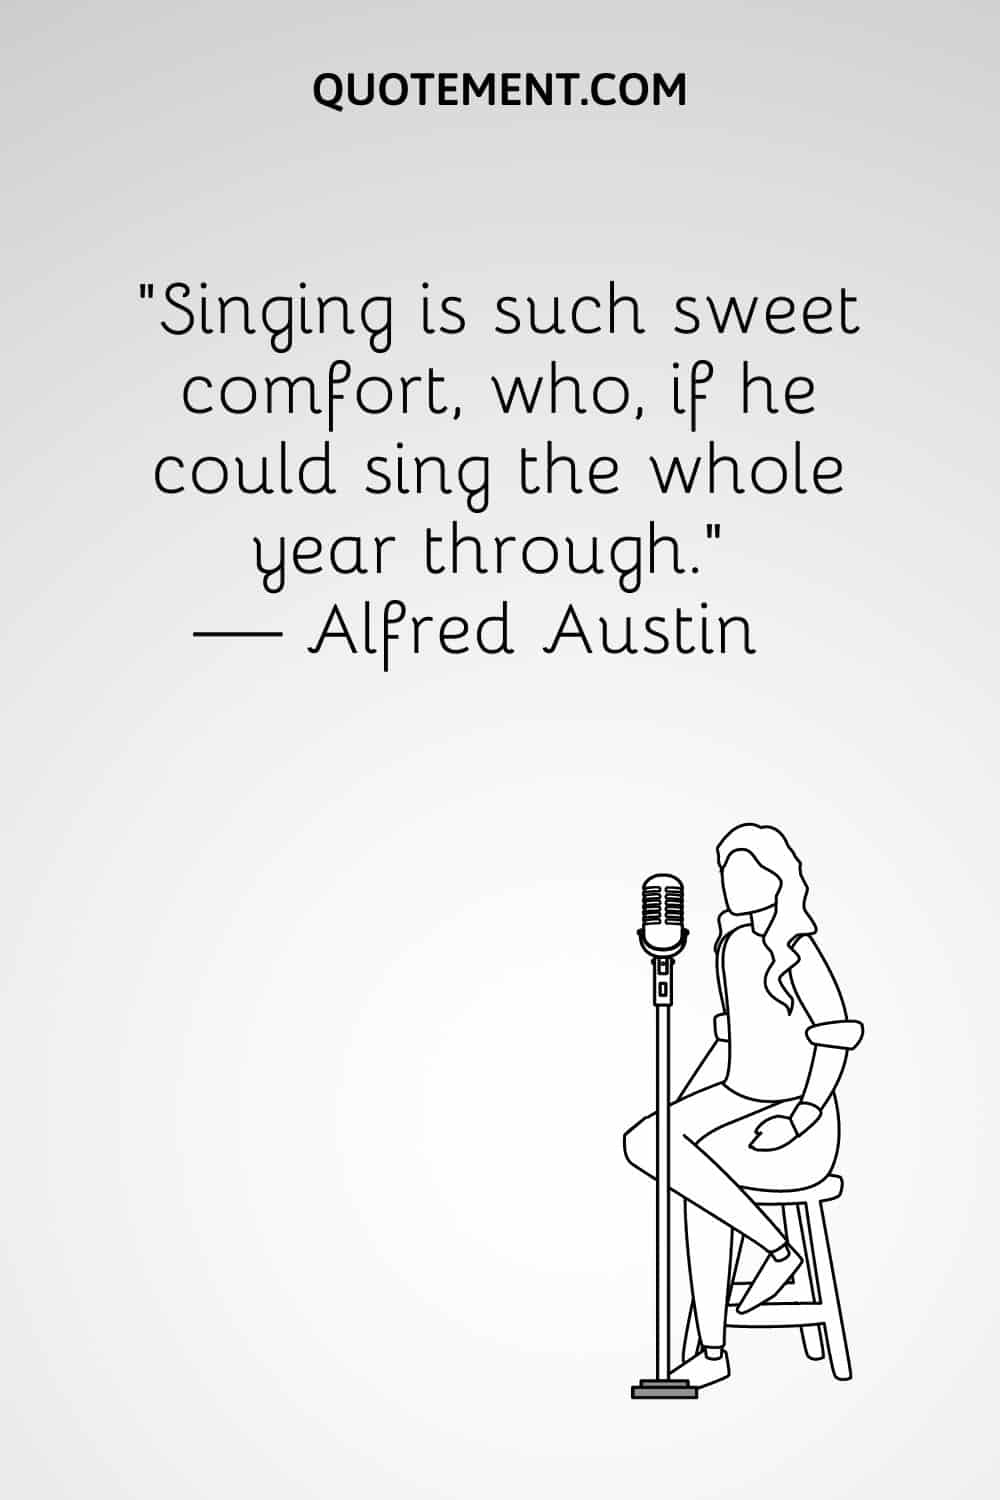 “Singing is such sweet comfort, who, if he could sing the whole year through.” — Alfred Austin